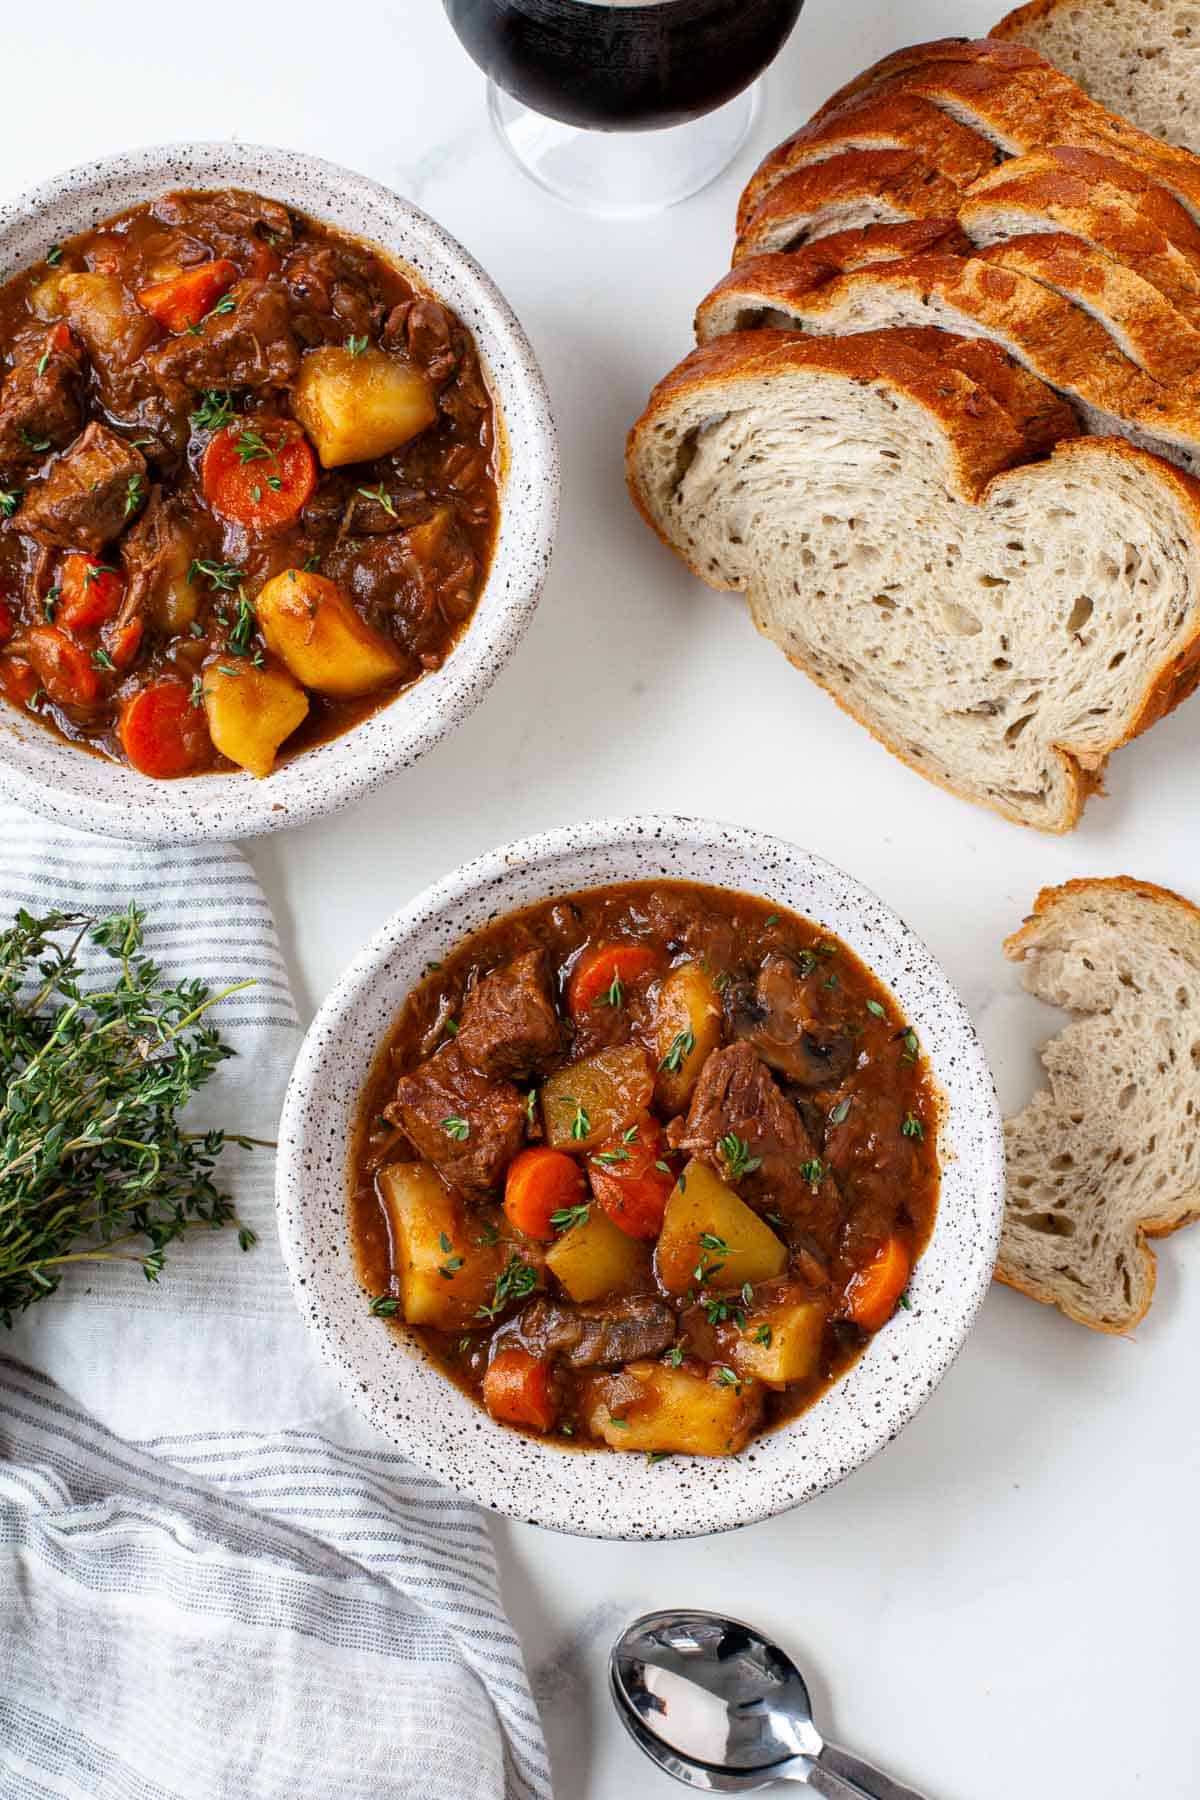 beef stew with potatoes and carrots in white speckled bowls with silver spoons, loaf of bread, striped towel